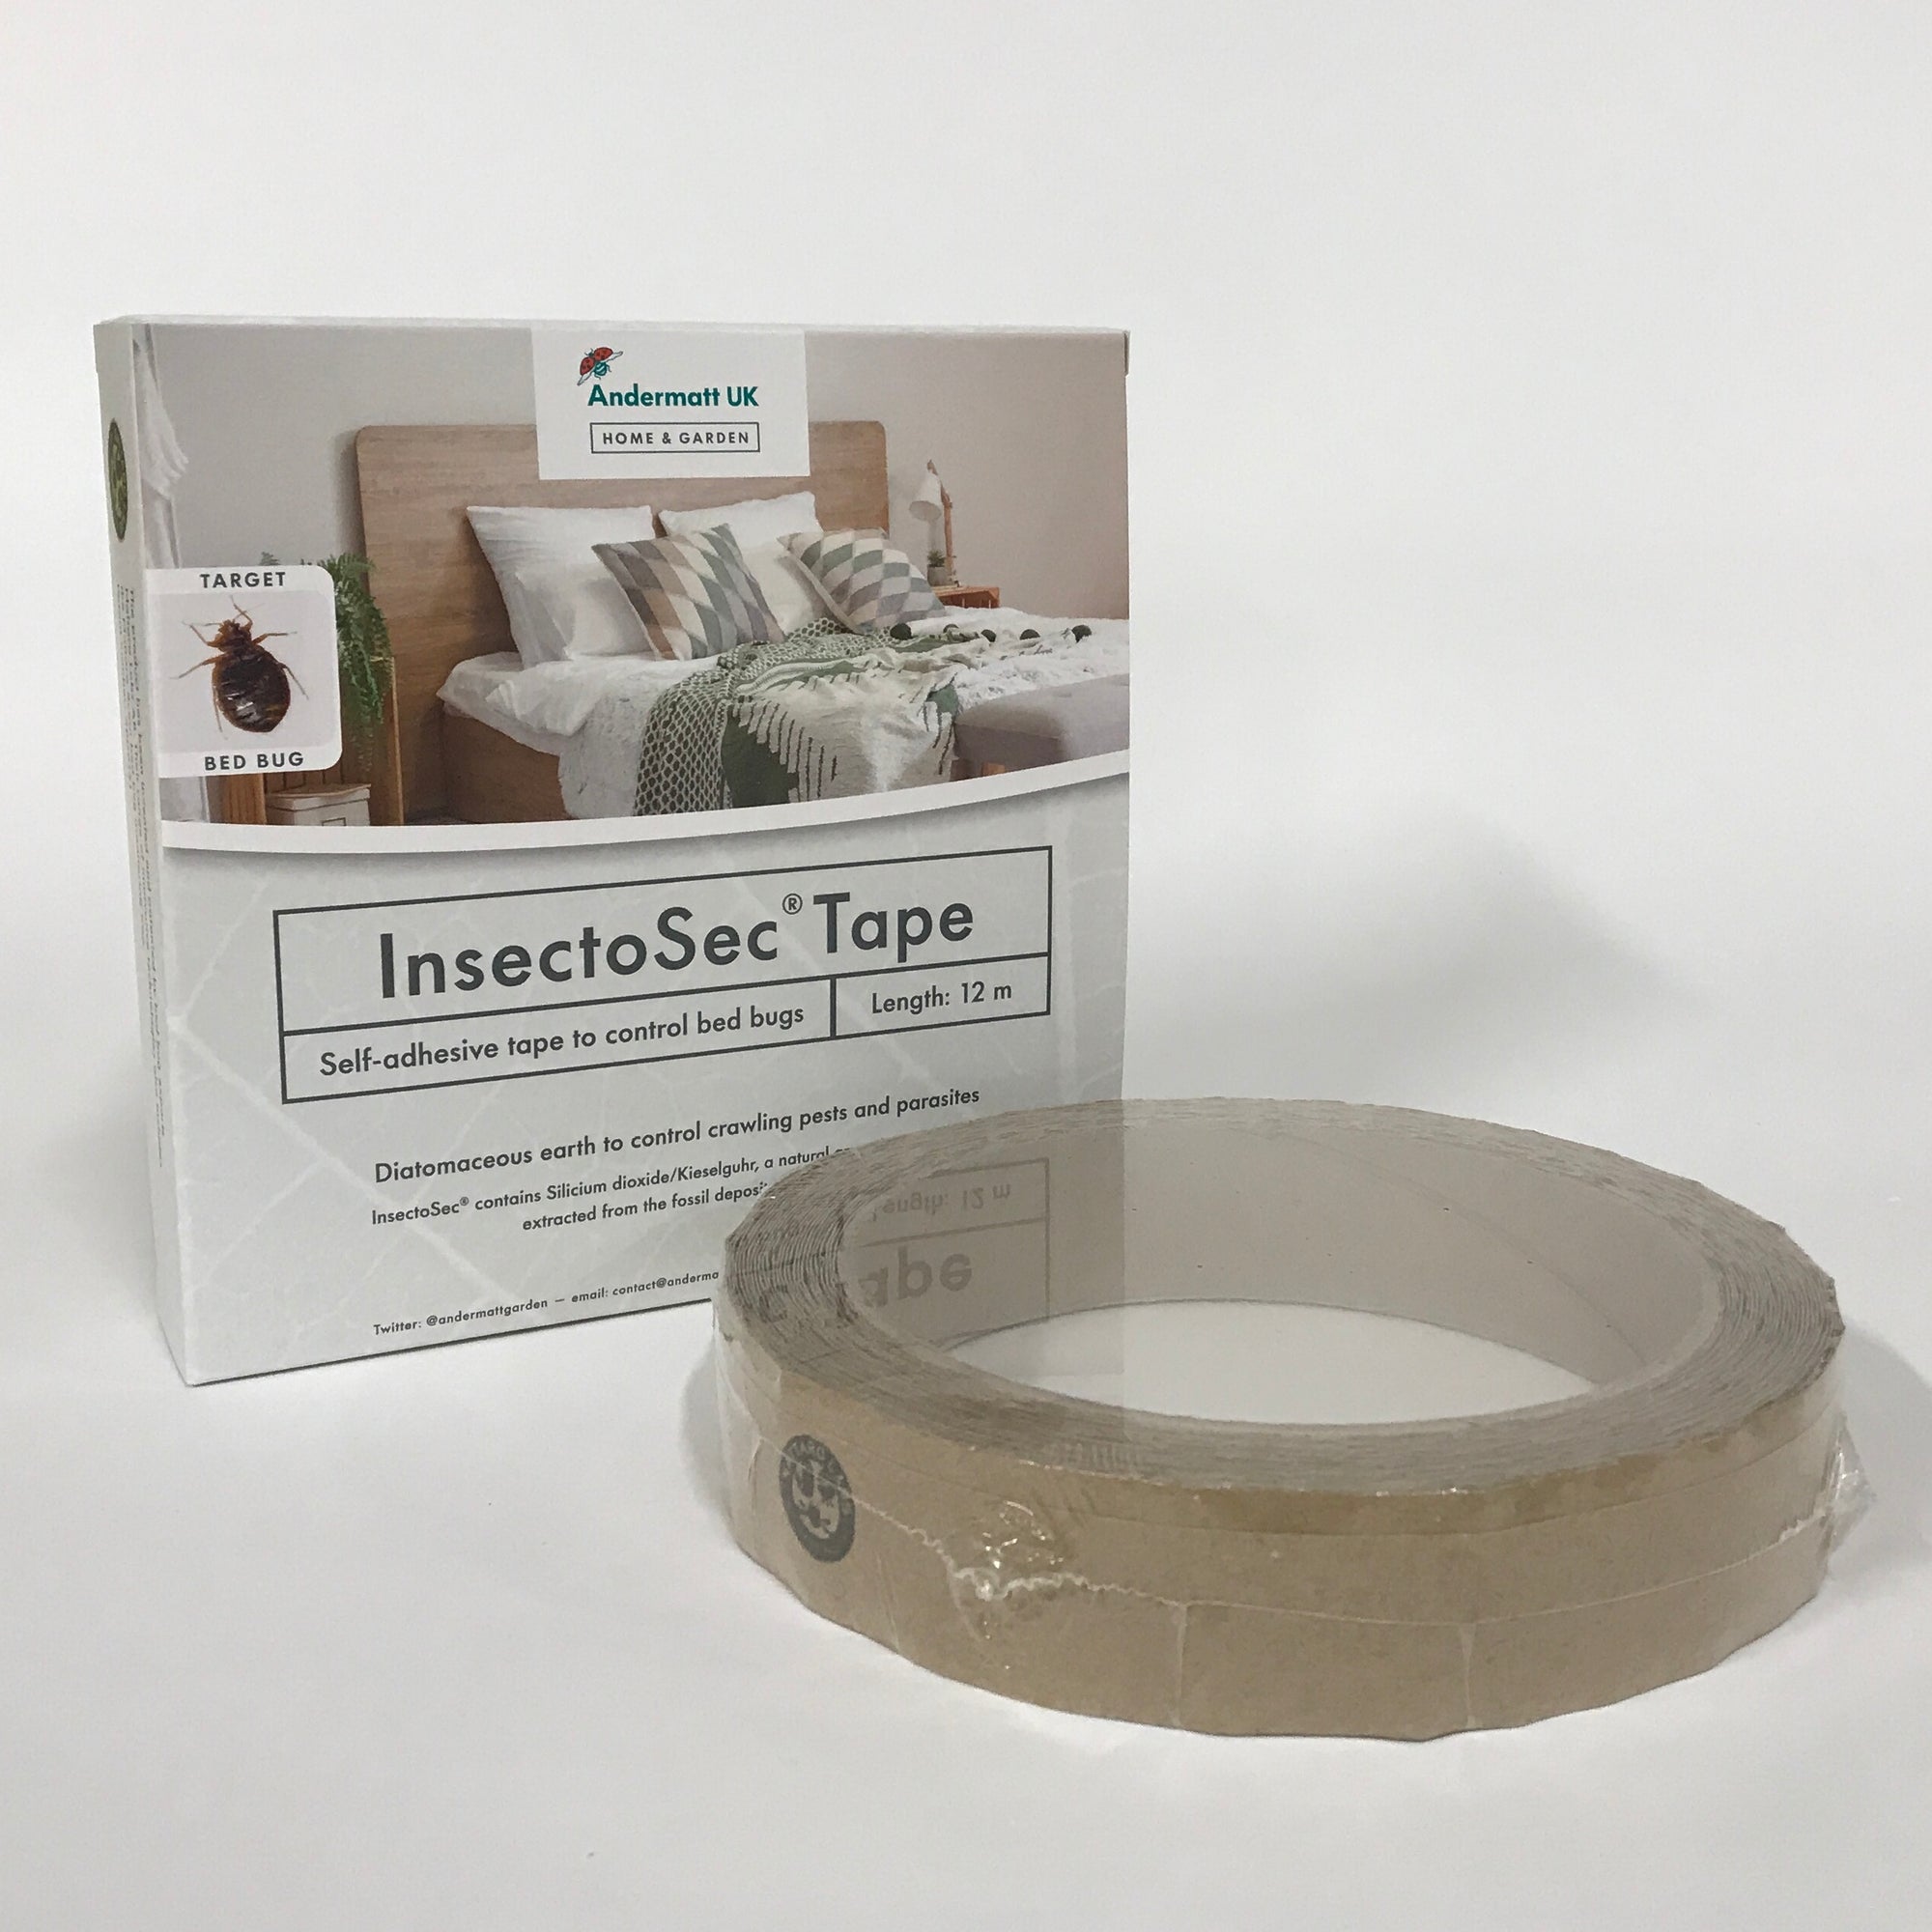 InsectoSec tape treatment against bed bugs